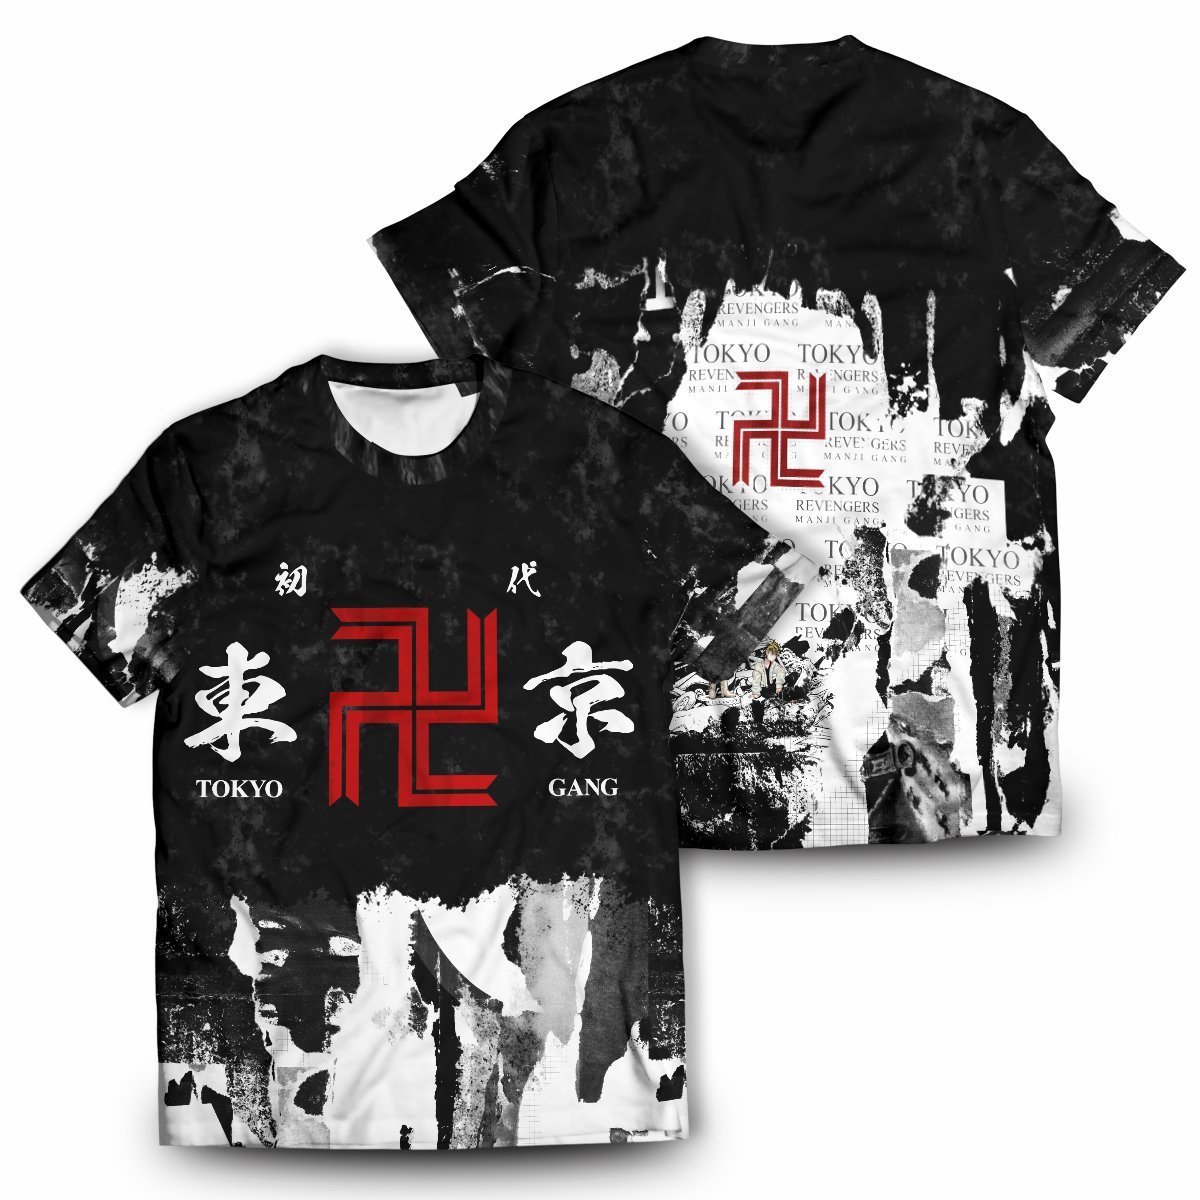 Shop the Latest Tokyo Revengers Gear and Merchandise